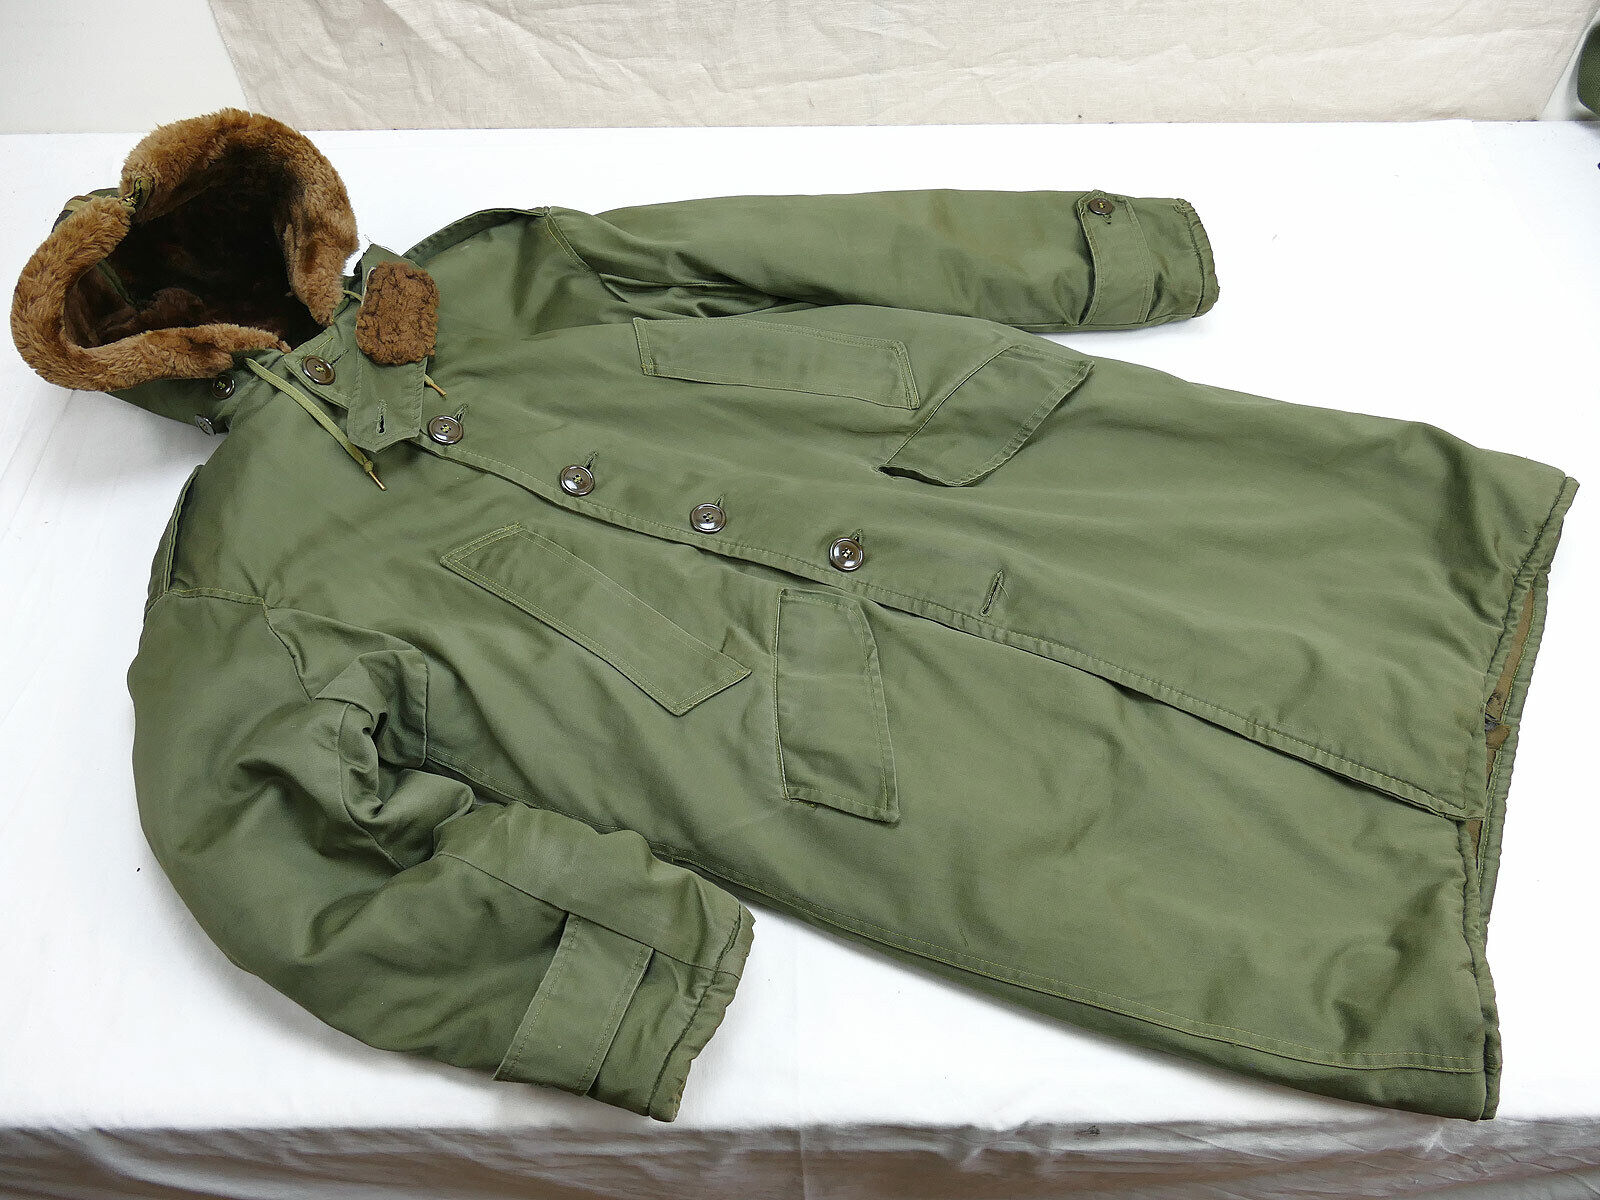 US ARMY Air Force Type B-9 Parka Jacket Type 1950's B9 Parka M as Version  Jacket